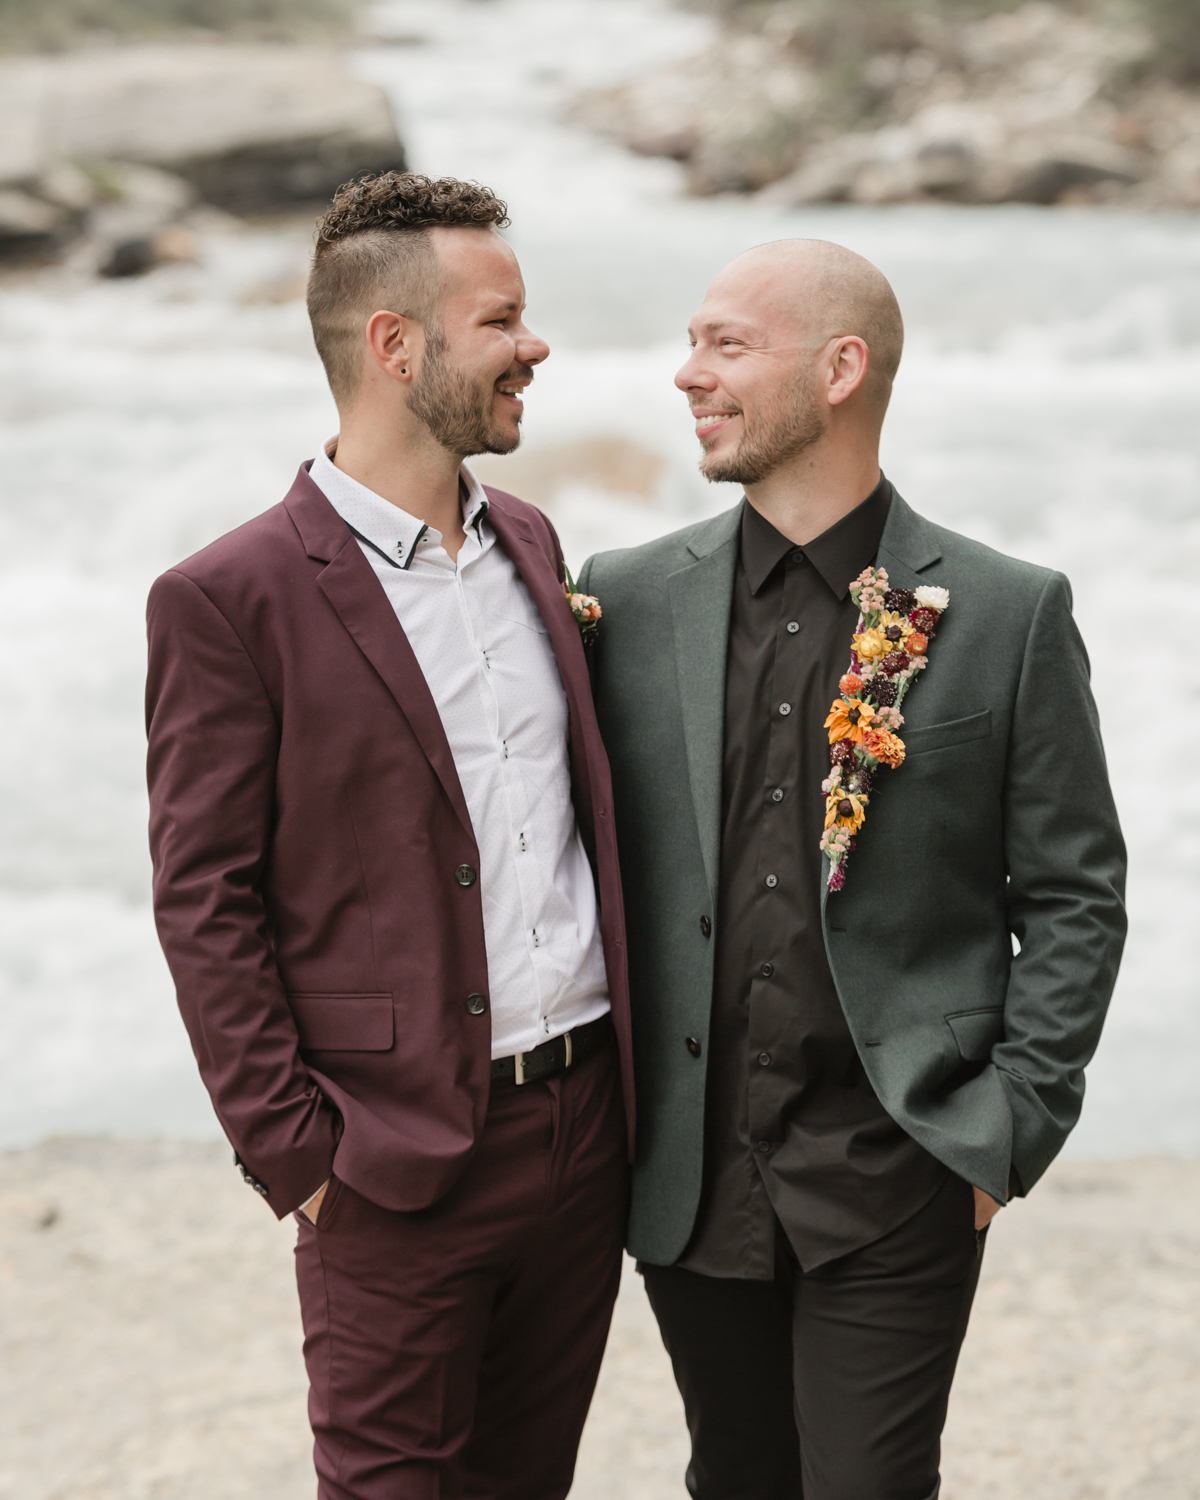 Brandon and Jamie elope at Mistaya Canyon in Banff National Park